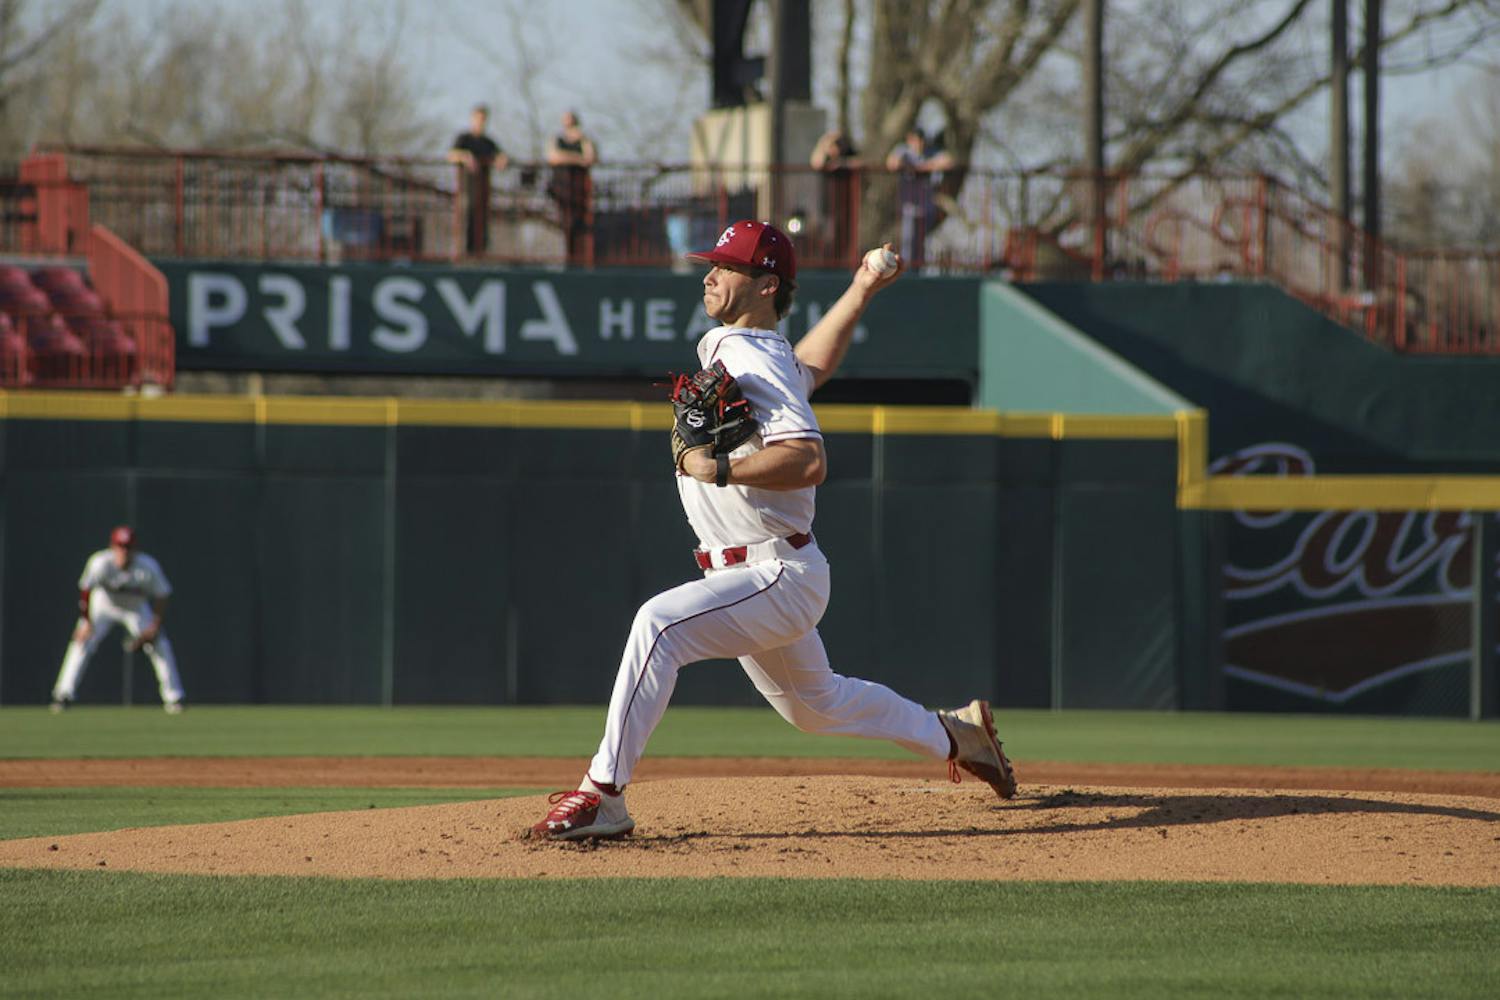 Junior pitcher James Hicks throws a pitch to a Queens batter during the matchup between the Gamecocks and the Royals at Founders Park on Feb. 22, 2023. South Carolina beat Queens 12-0.